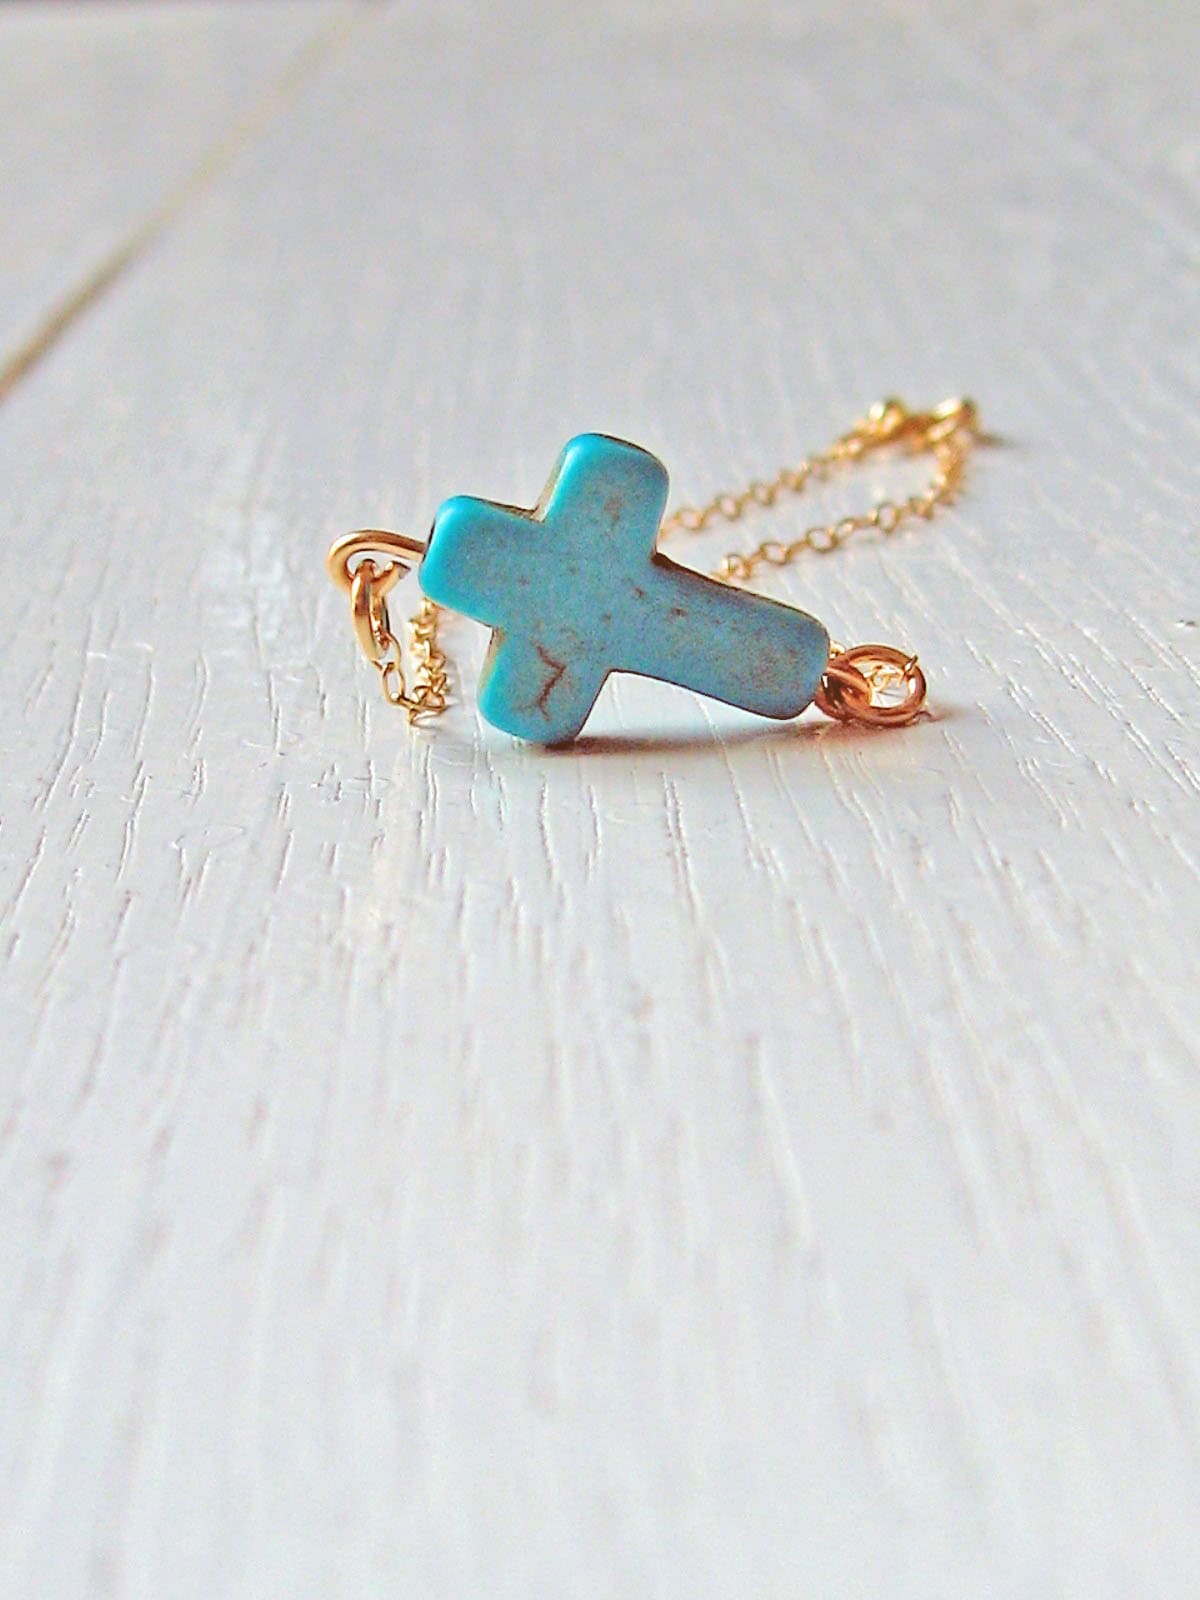 Baby Cross Anklet 14k Gold Fill or Sterling Silver Turquoise - Etsy